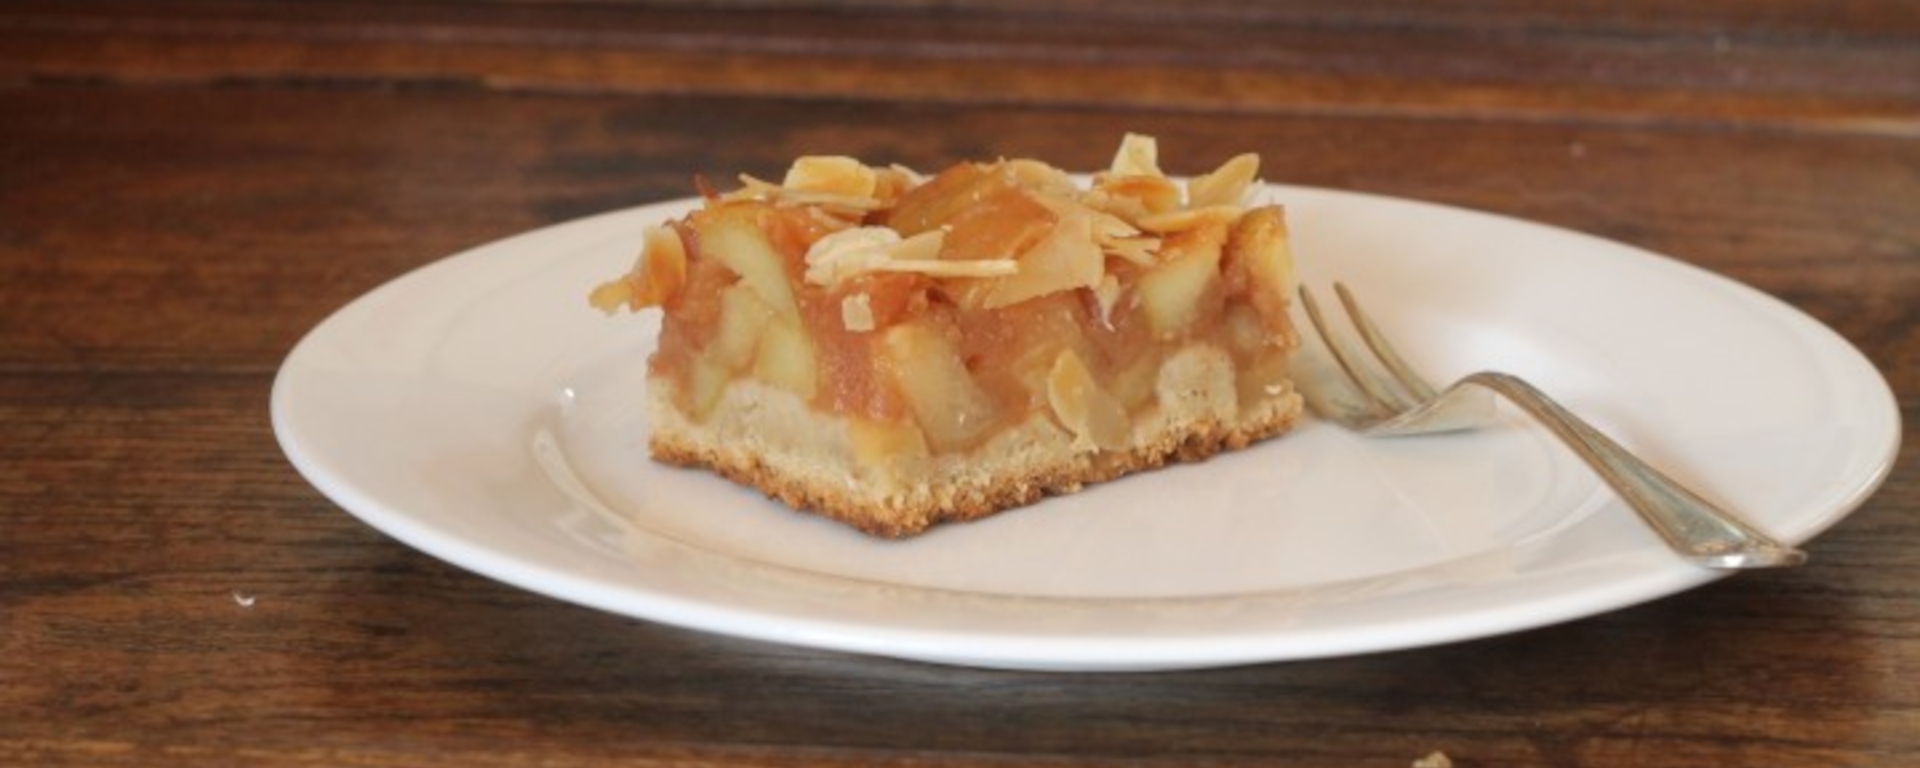 Apple and Almond Slice